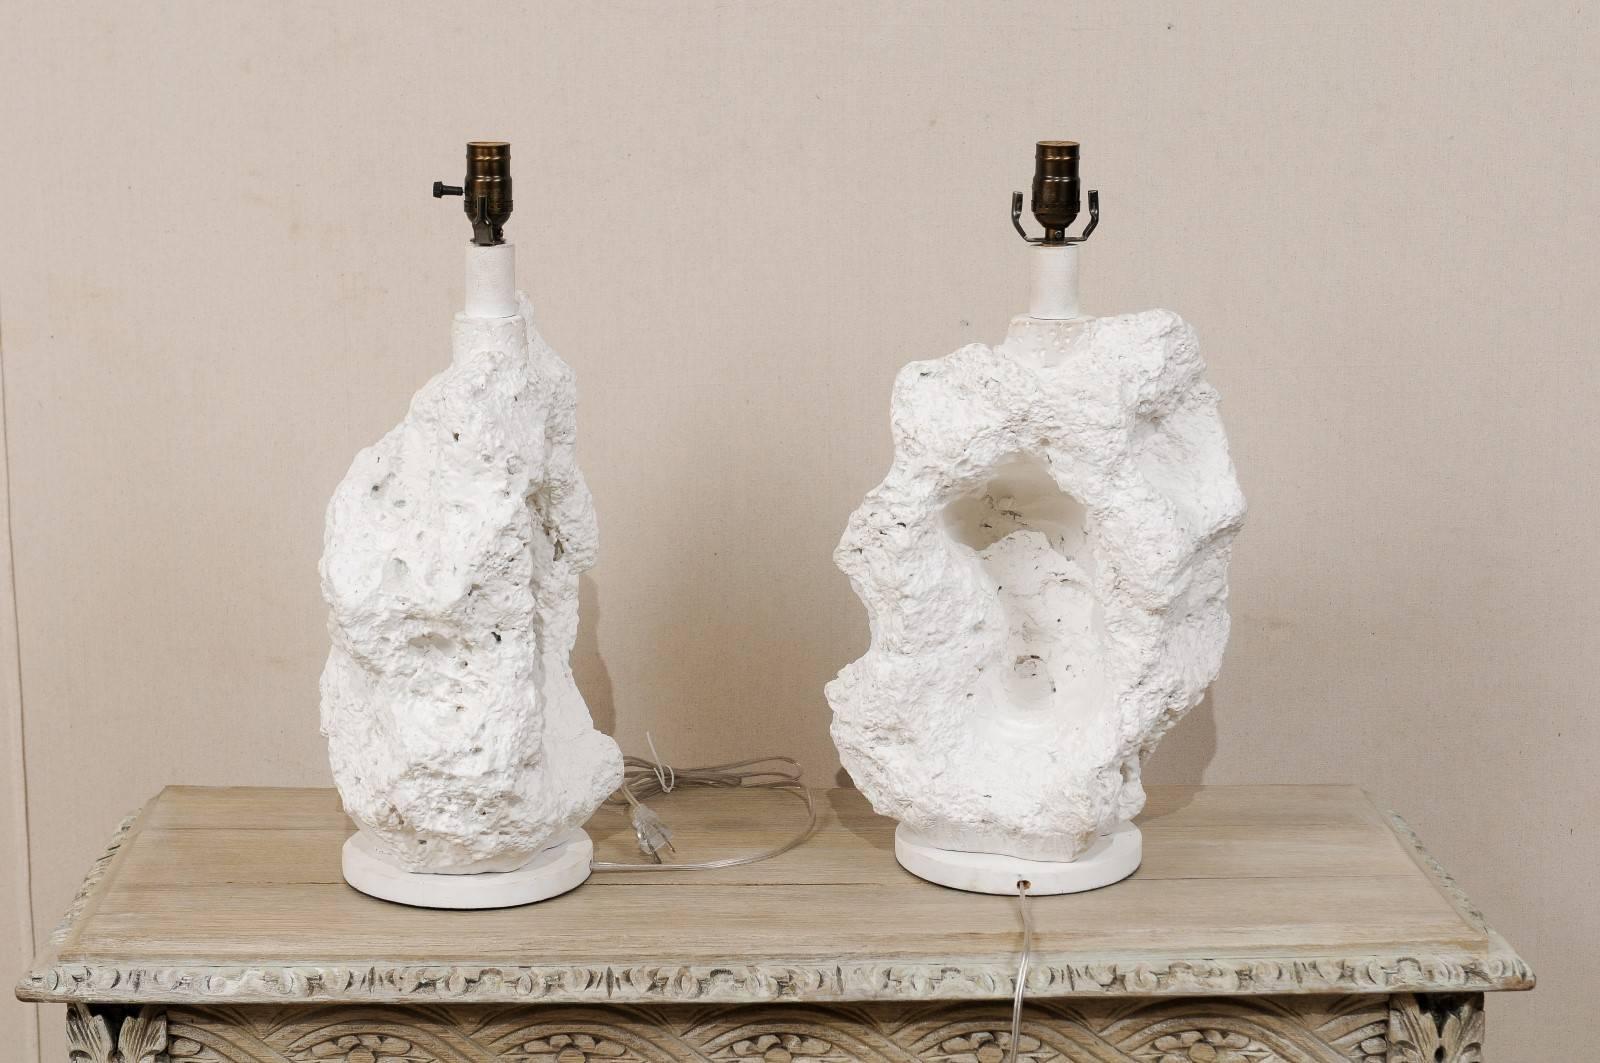 Painted Pair of Sirmos Style White Table Lamps, Modern Sea Rock-Like Look of Plaster